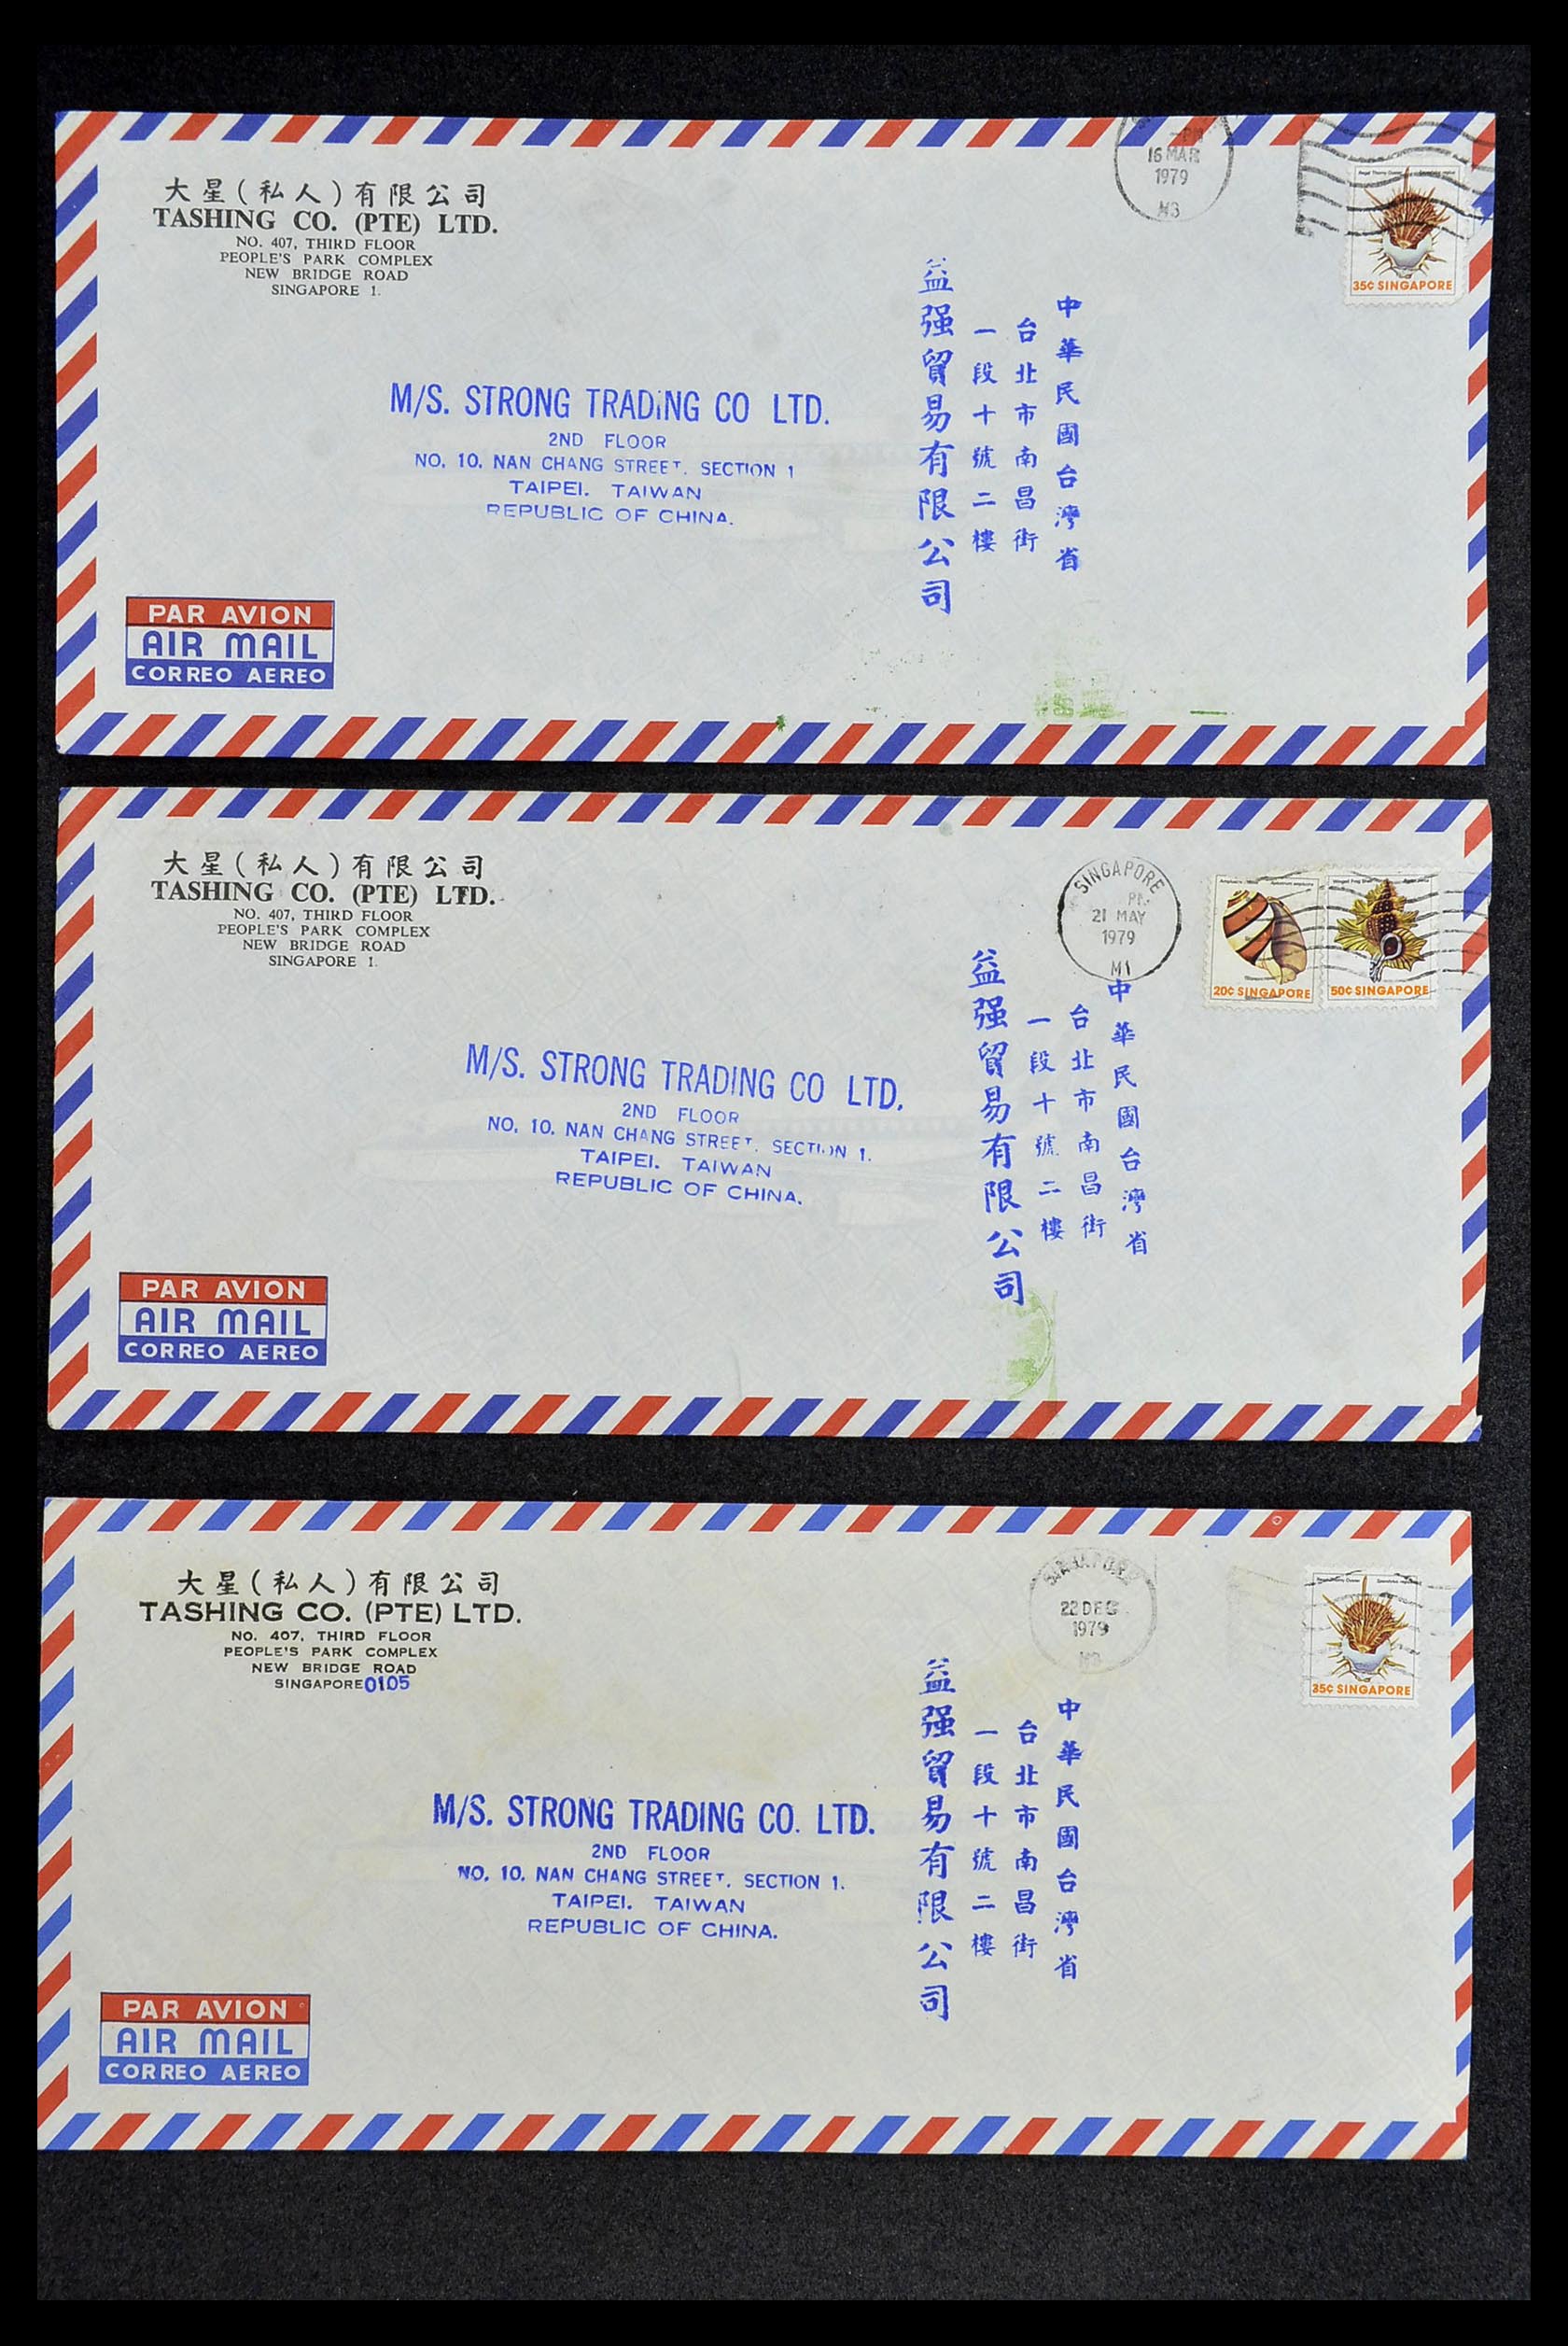 34402 105 - Stamp collection 34402 Taiwan covers 1960-2000.